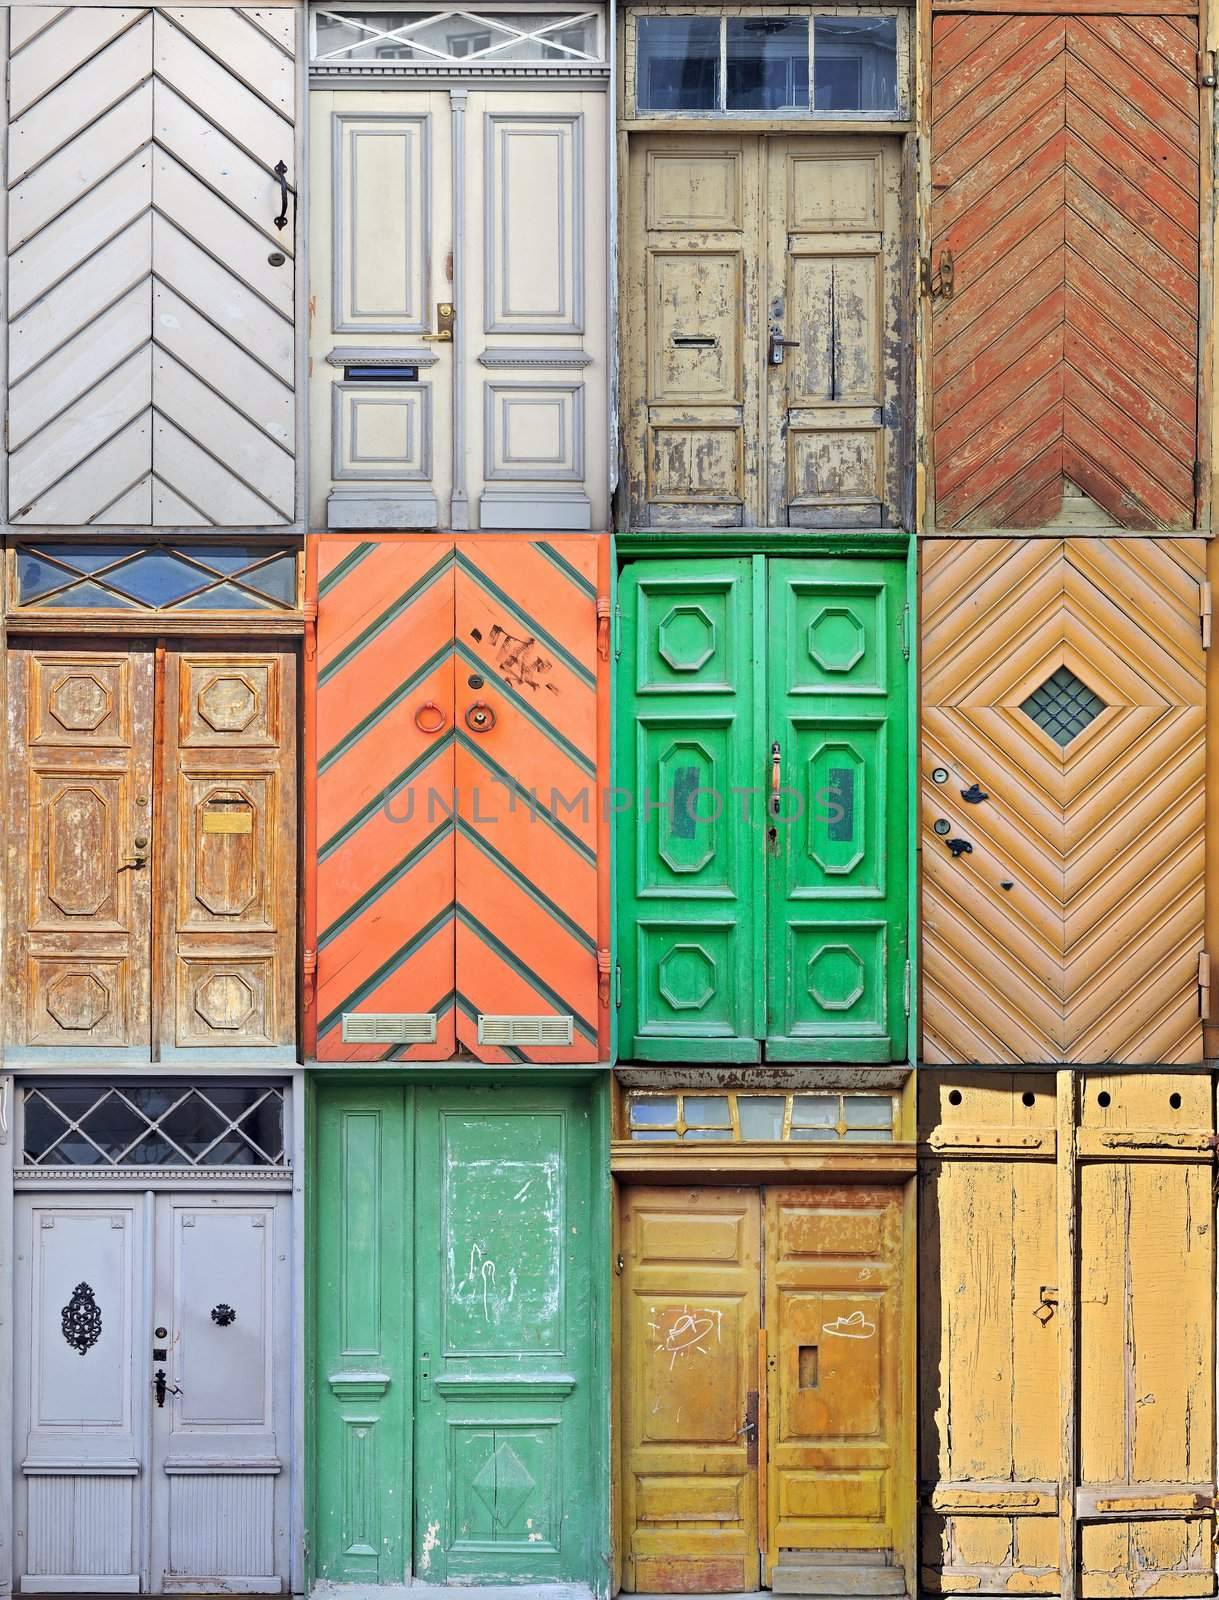 Antique doors of houses in the old part of town